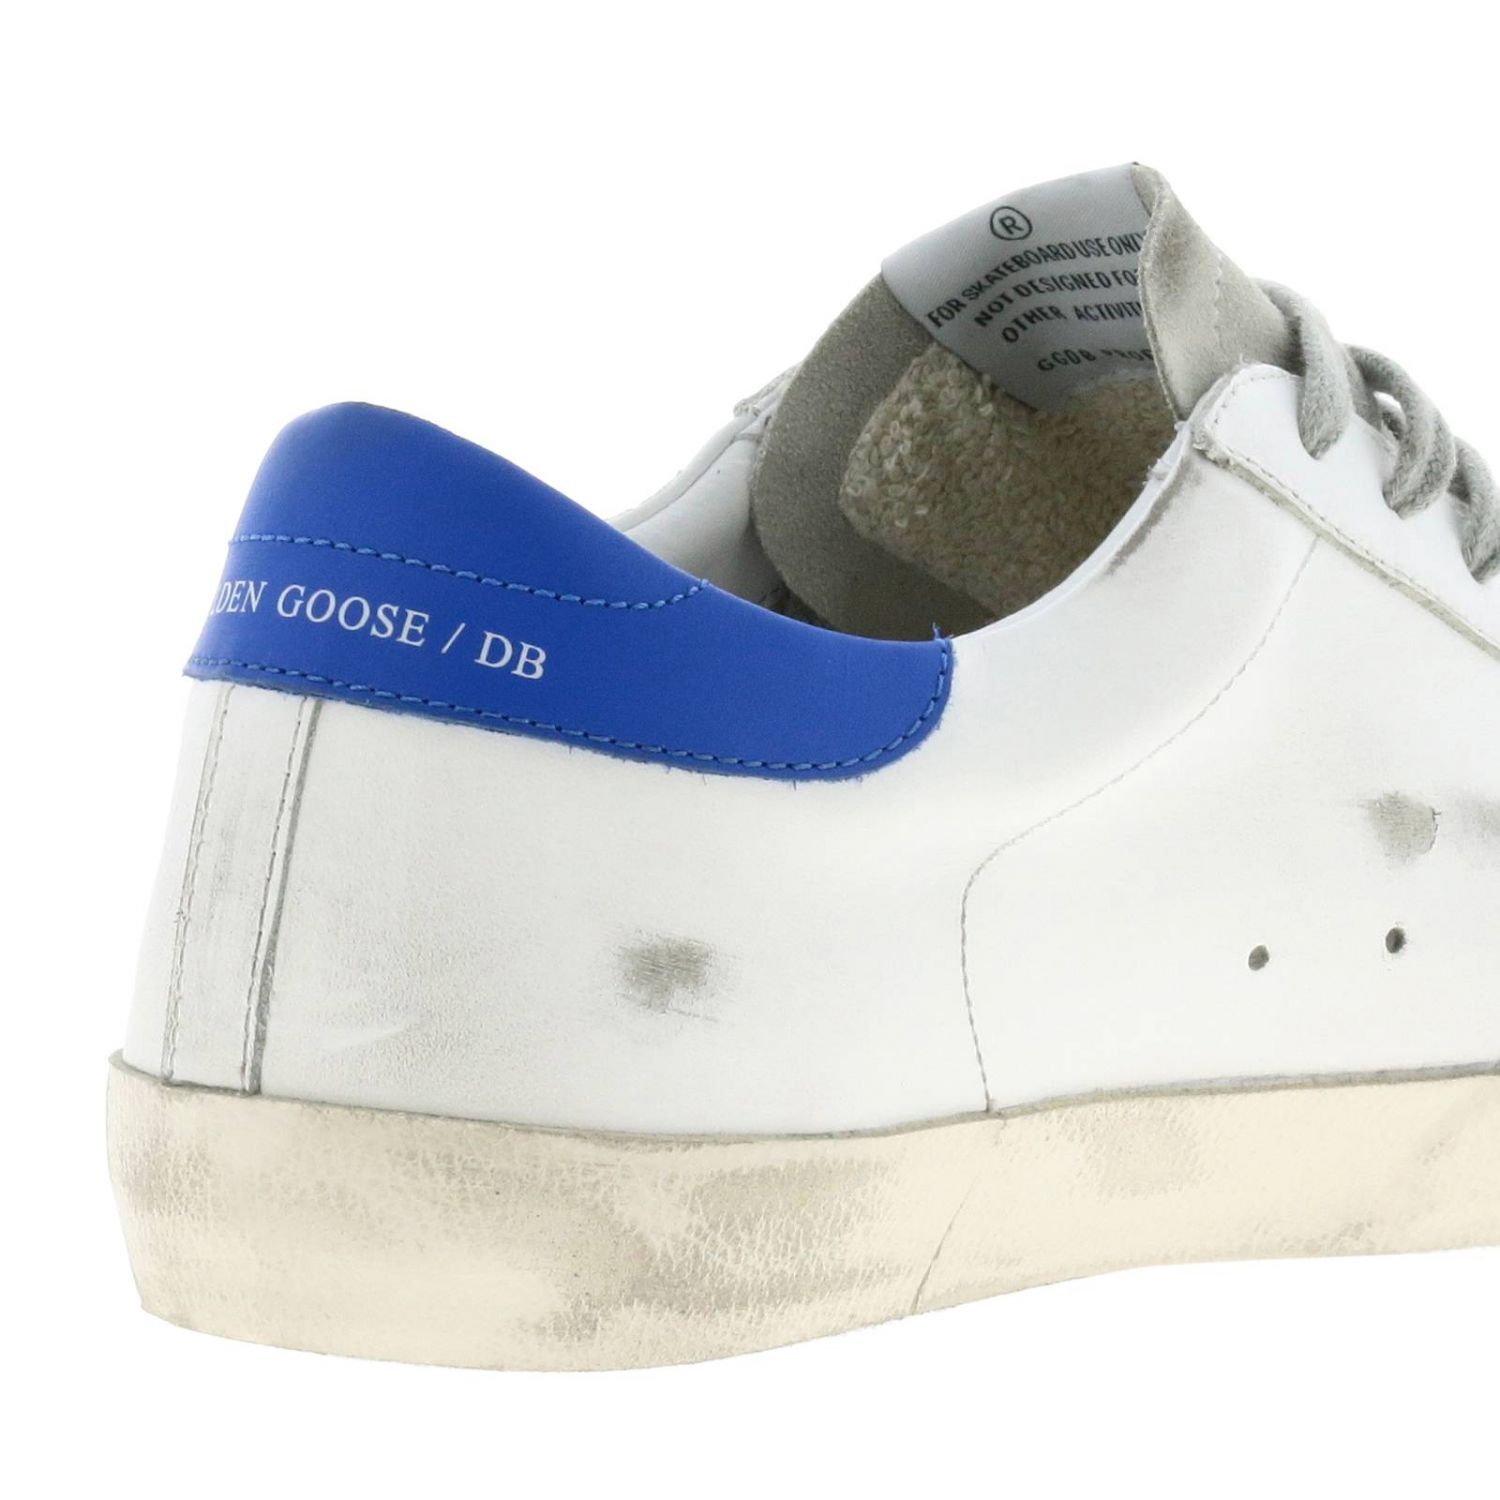 Golden Goose Outlet: Superstar sneakers in used leather and suede ...